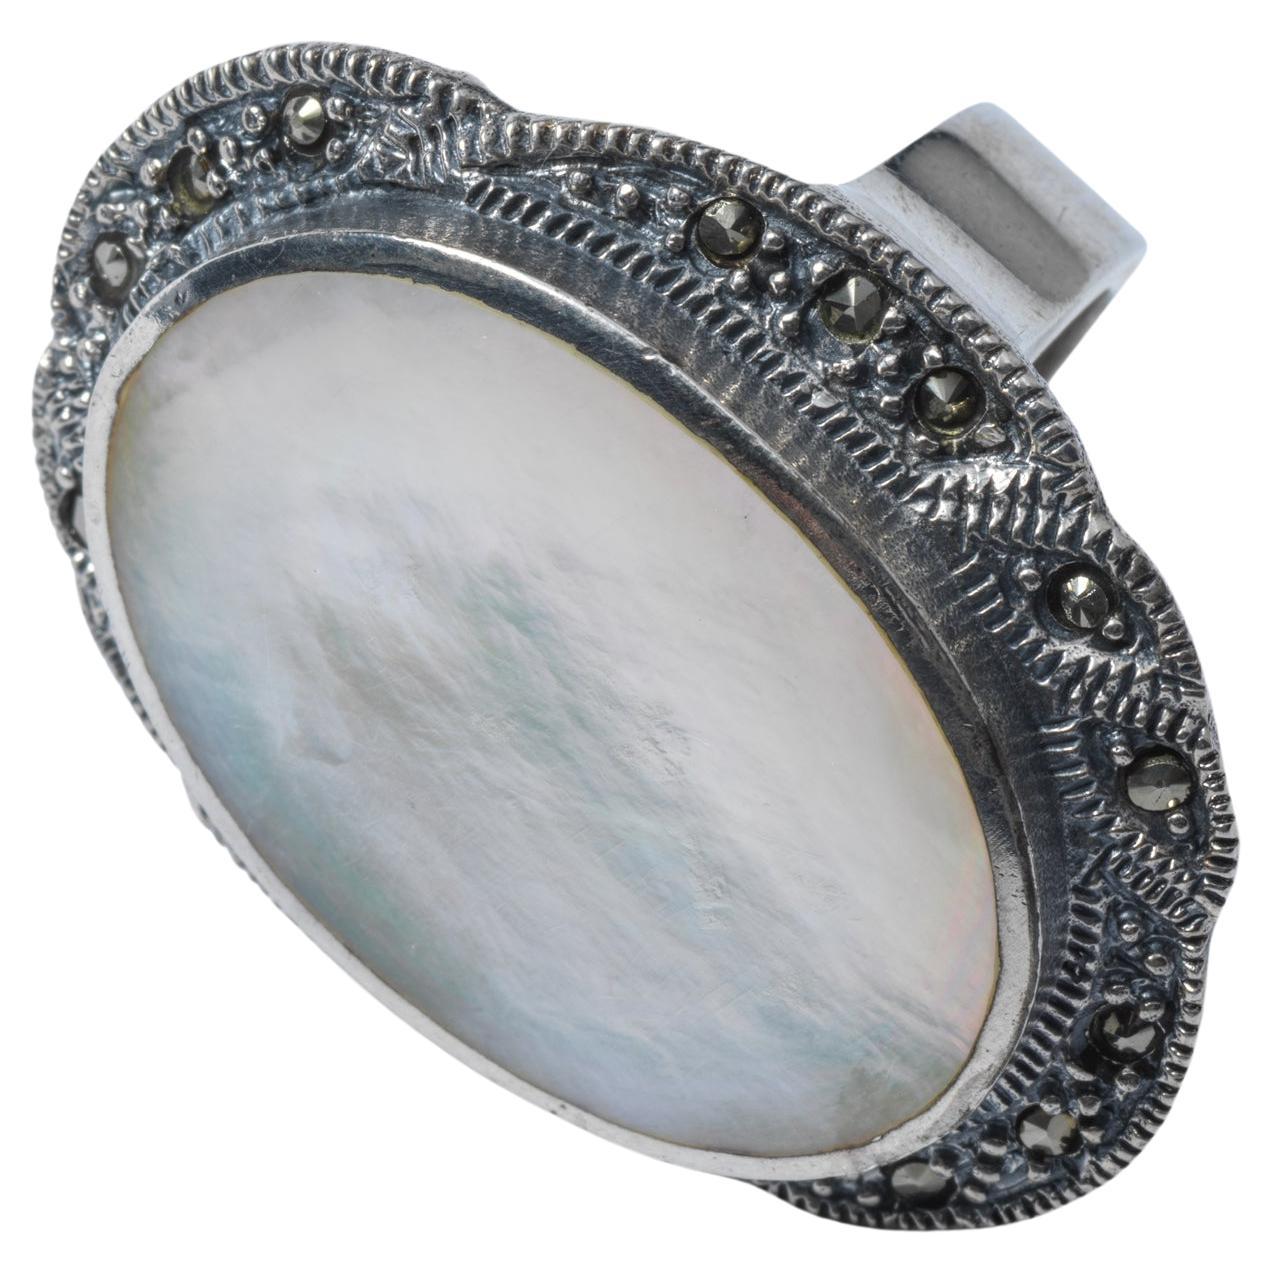 A large beautiful ring that makes a statement, this is the one. The large oval shaped mother of pearl is set in silver with small pyrites. Its made in the first half of the 20th c in northern Europe. If worn by an elderly person it will fit well and